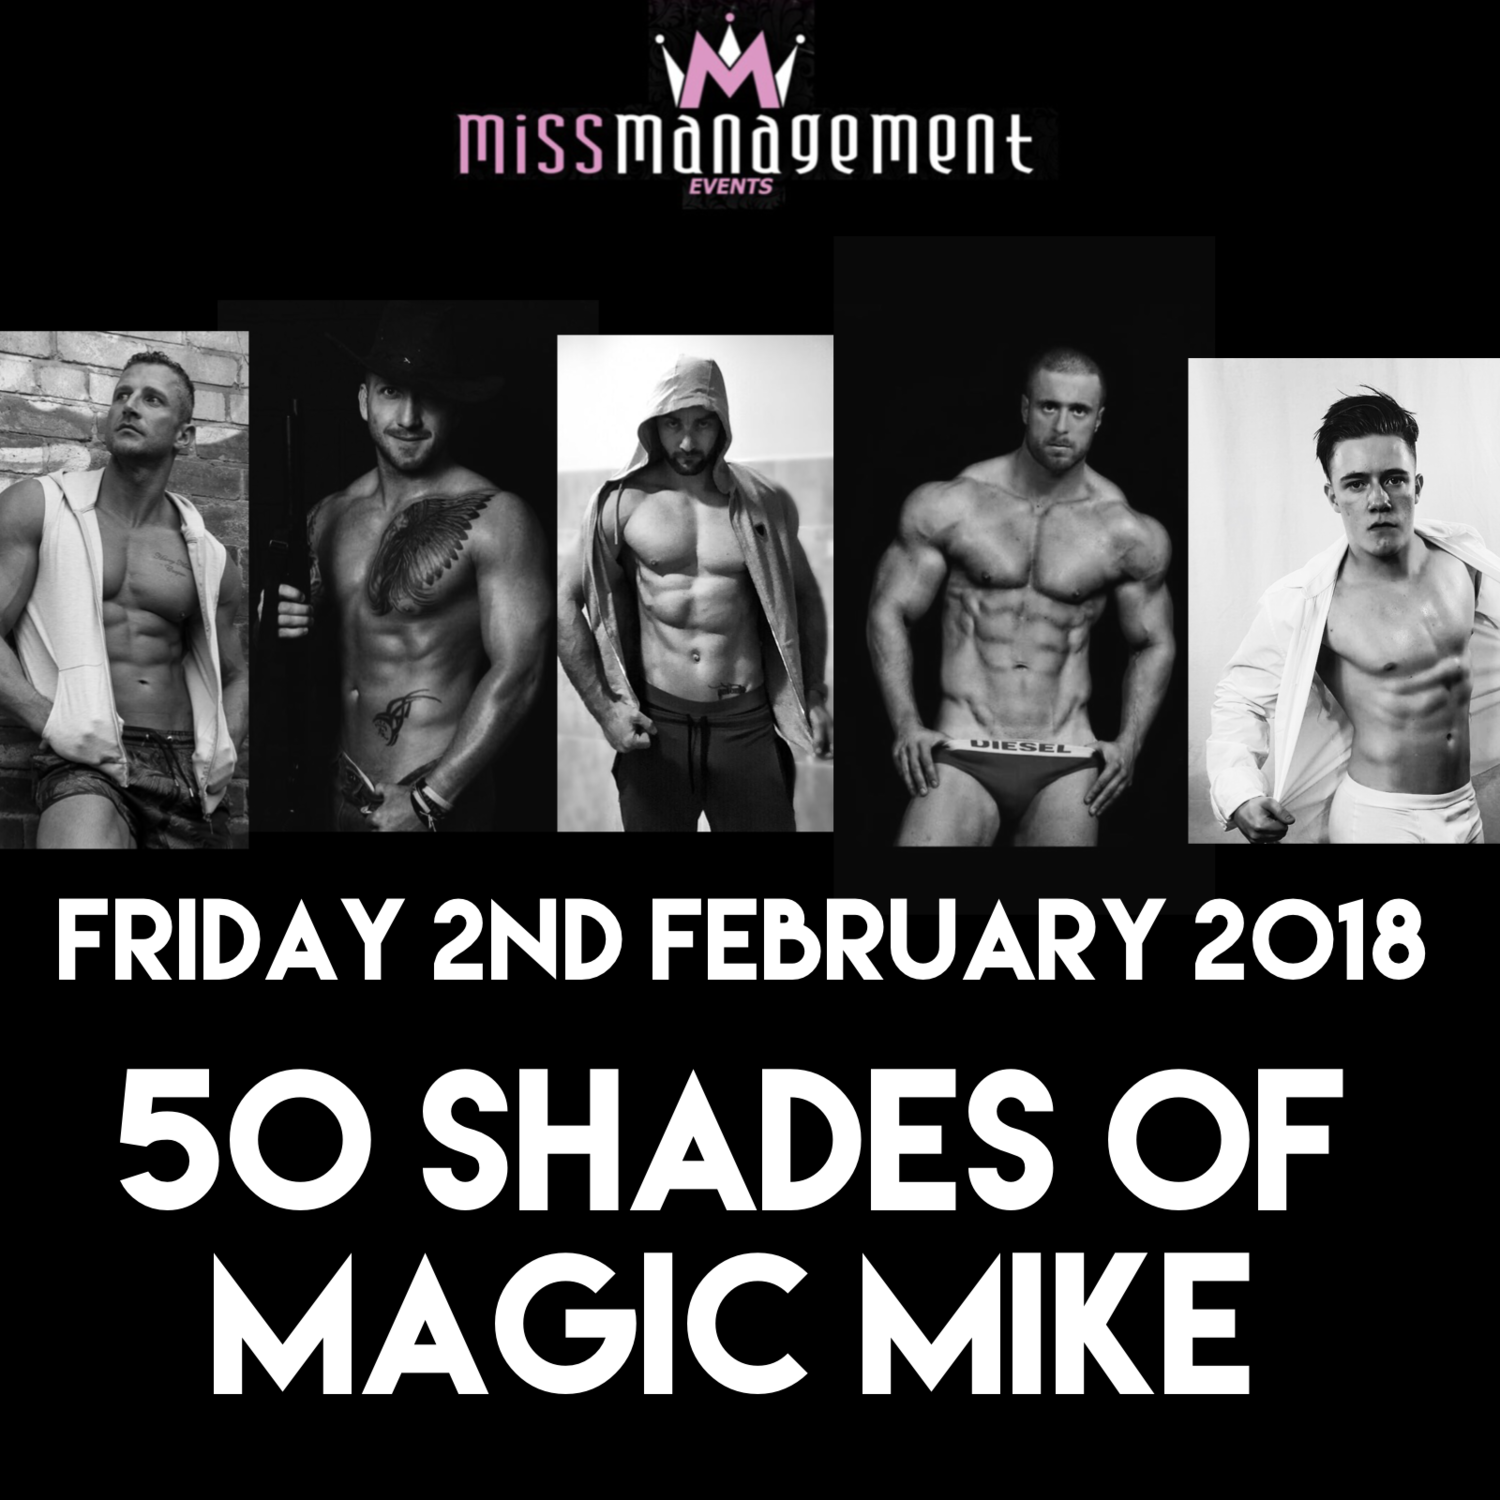 (MM19) ‘50 Shades of Magic Mike’ Rows 1-15